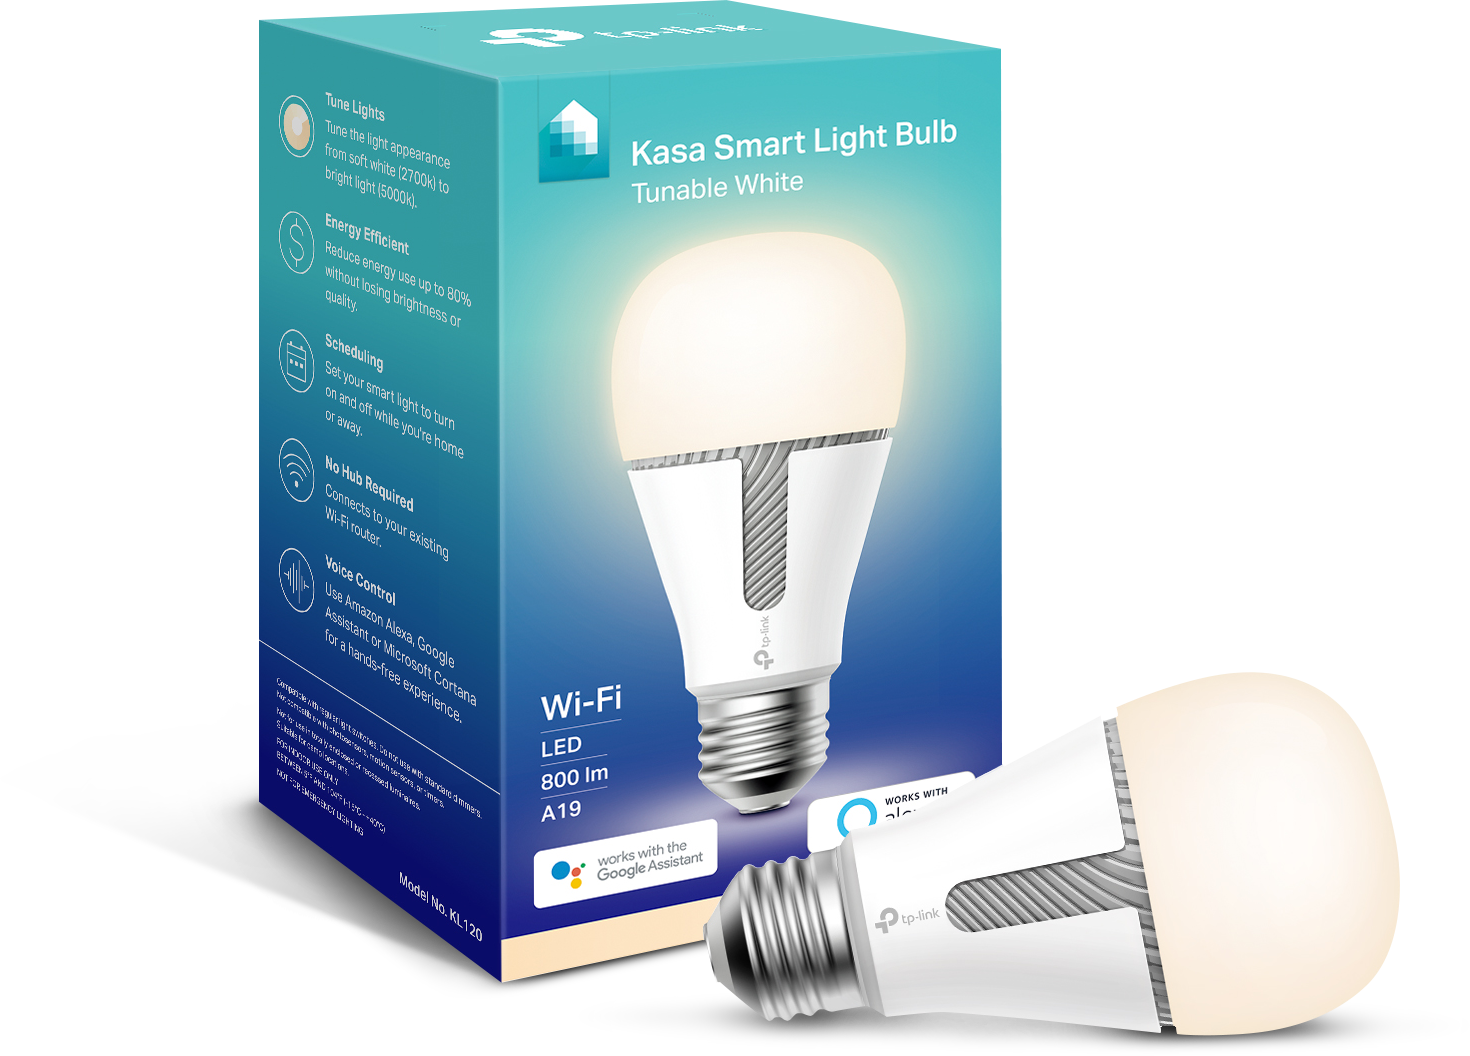 THE FIVE BEST SMART LIGHT BULBS FOR YOUR HOME. – THE TEN BEST